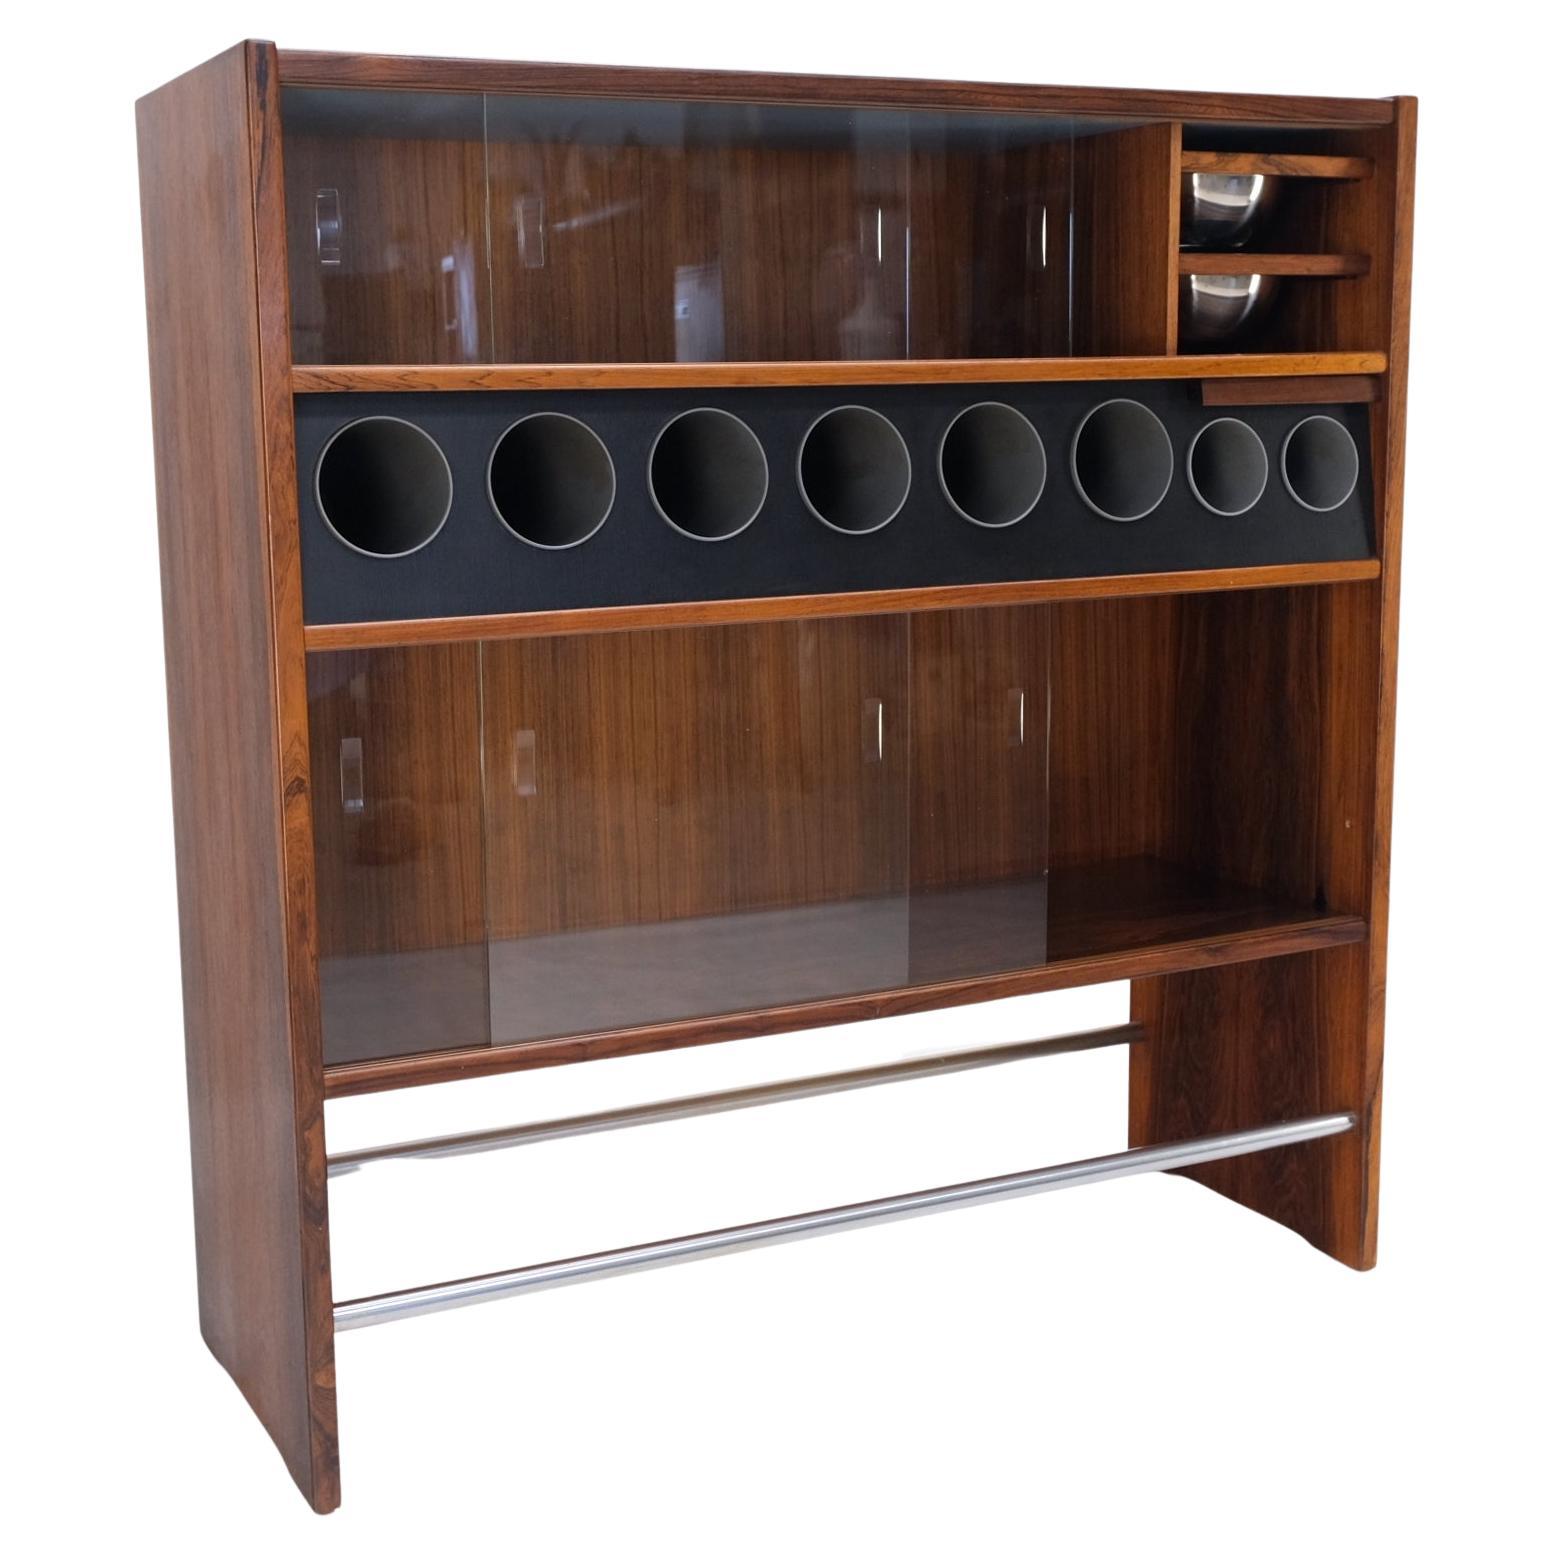 Lacquered Danish Mid-Century Modern Rosewood liquor Cabinet Bar Ice Trays Compartment MINT